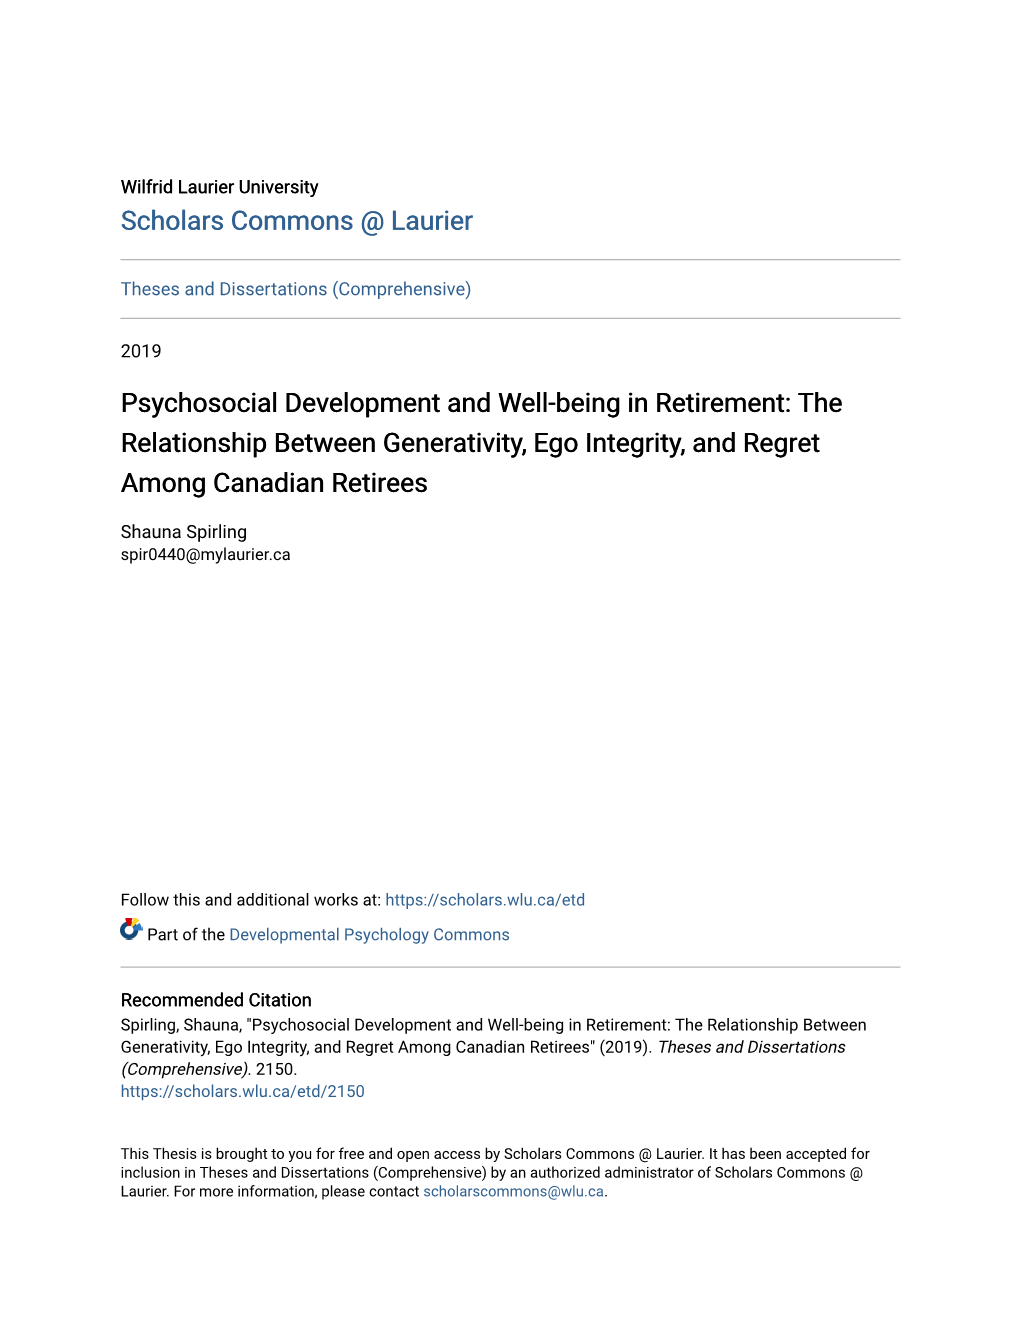 Psychosocial Development and Well-Being in Retirement: the Relationship Between Generativity, Ego Integrity, and Regret Among Canadian Retirees